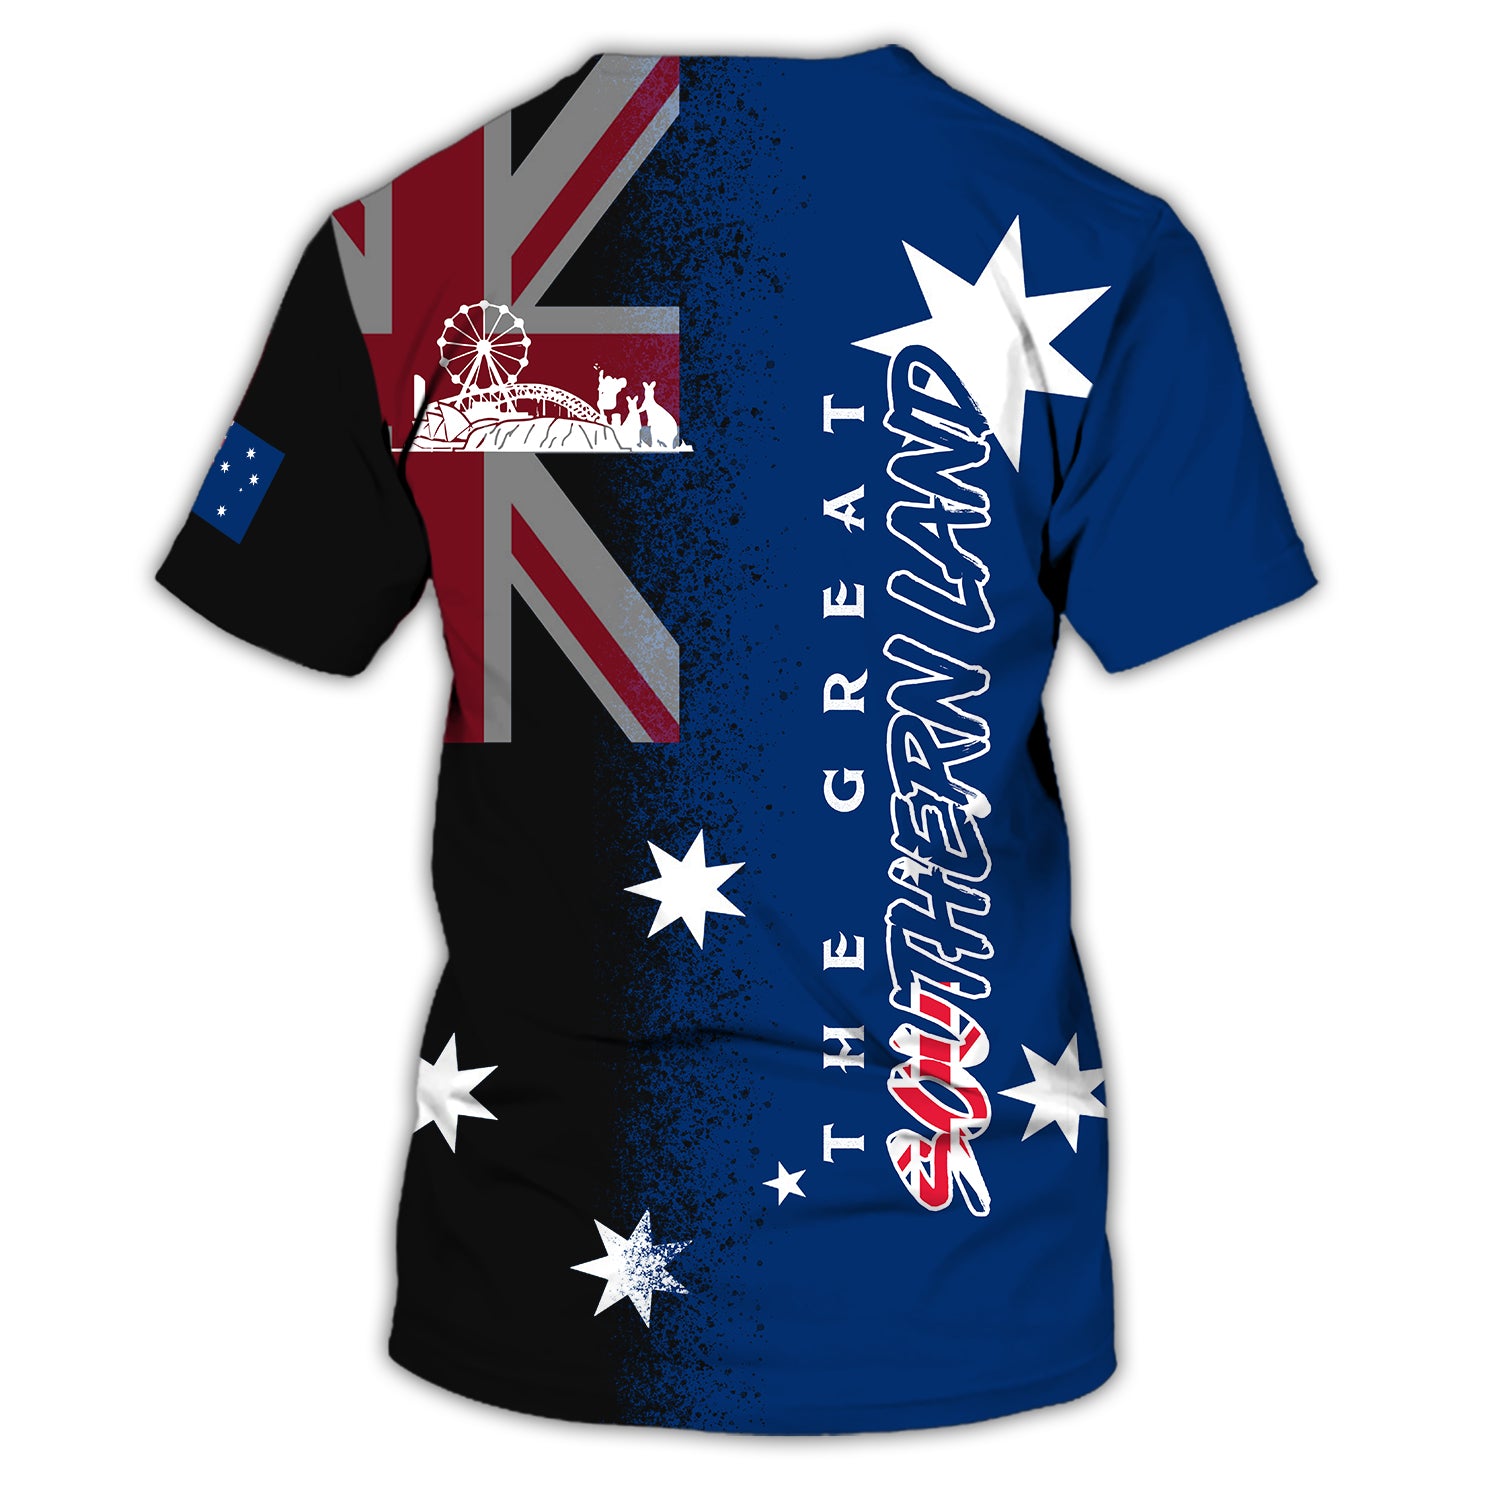 The Great Southern Land 3D T Shirt 163 - Nvc97